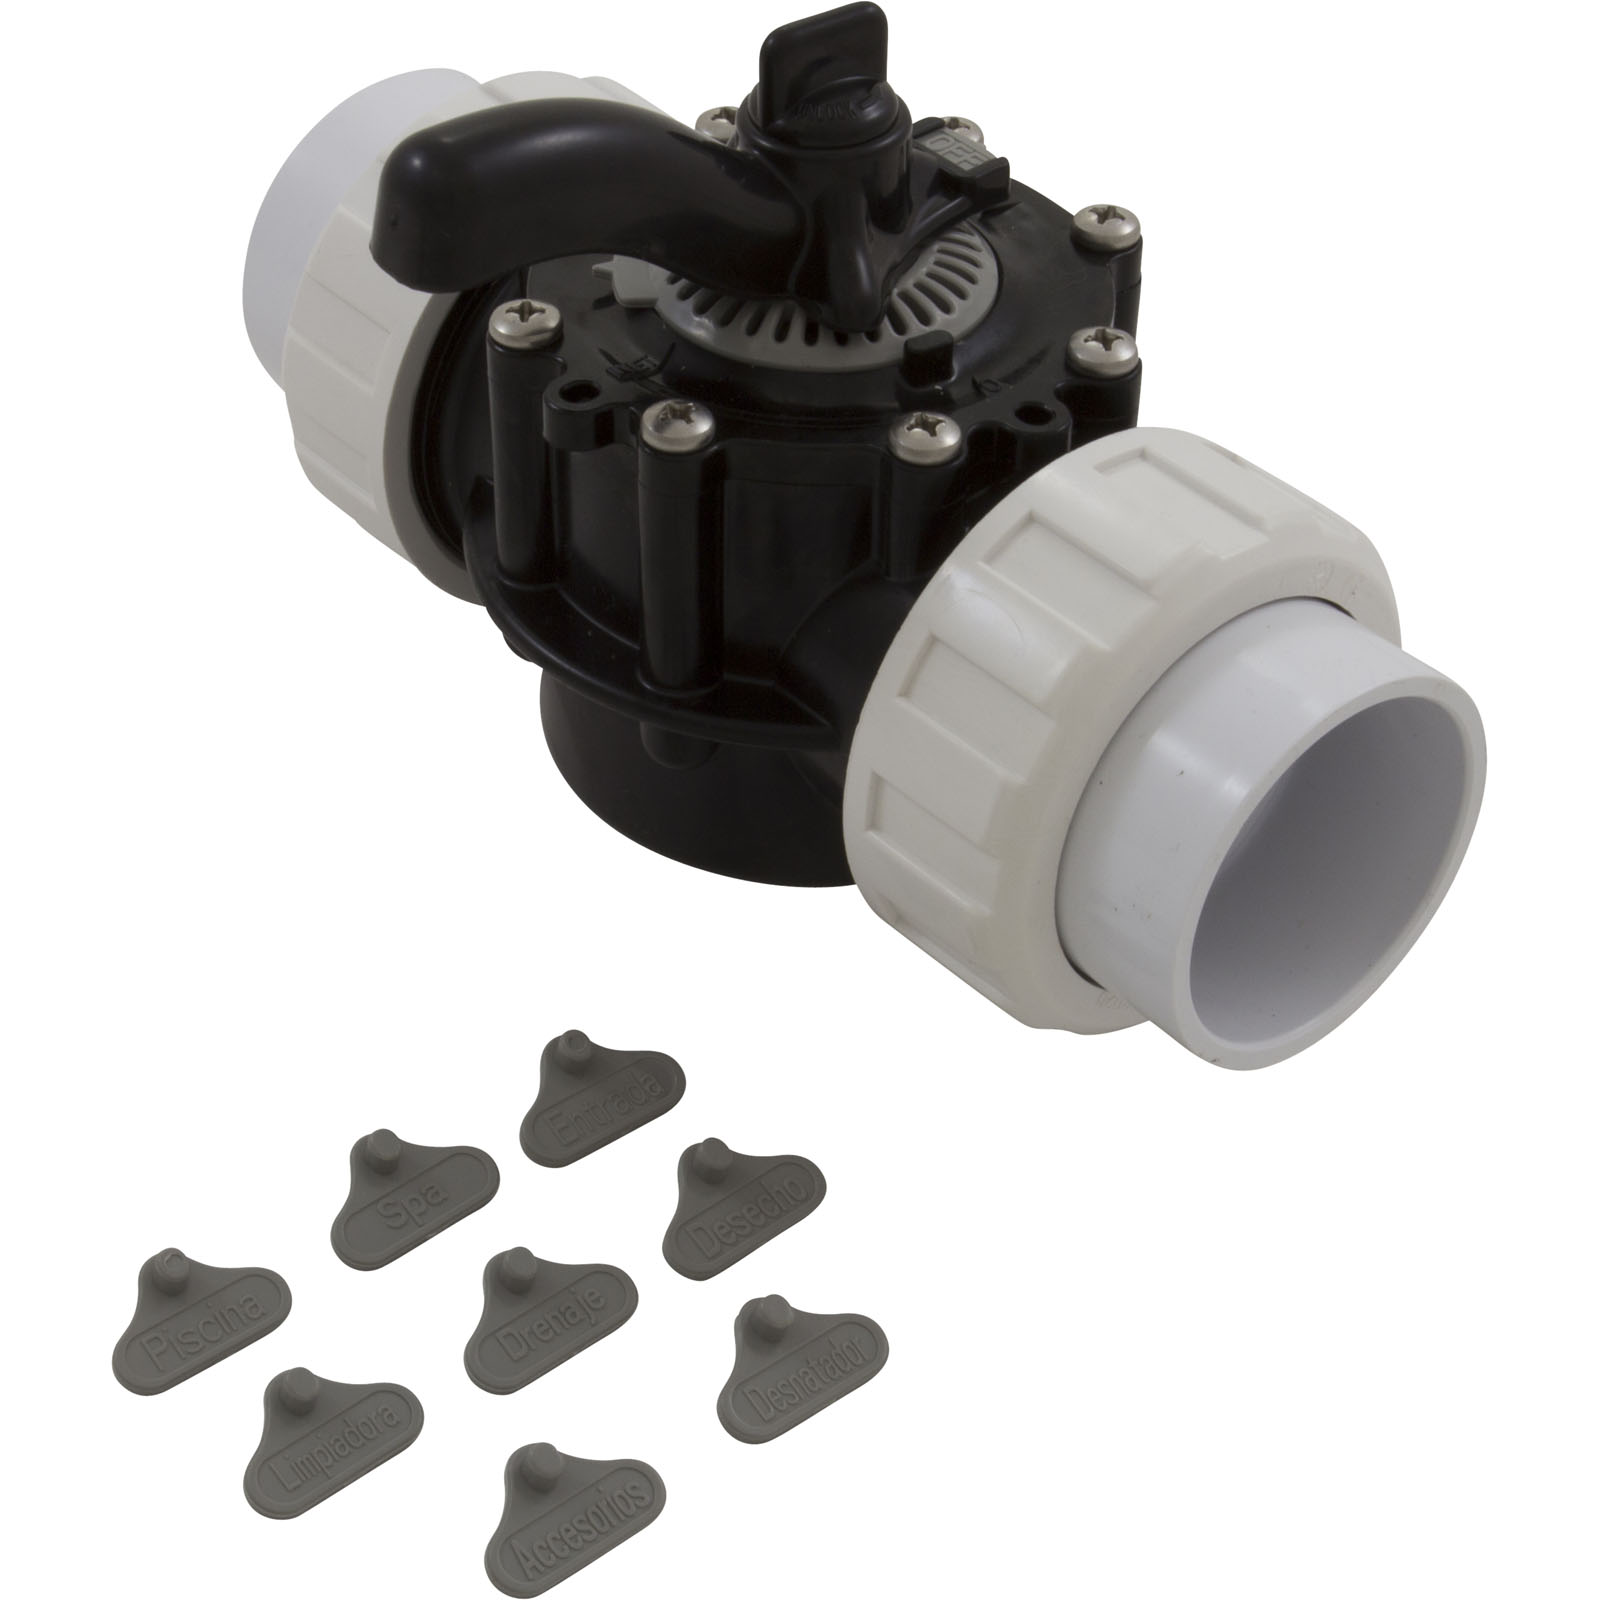 Picture of 25922-204-000 Diverter Valve 2In Unions 2-Way Black